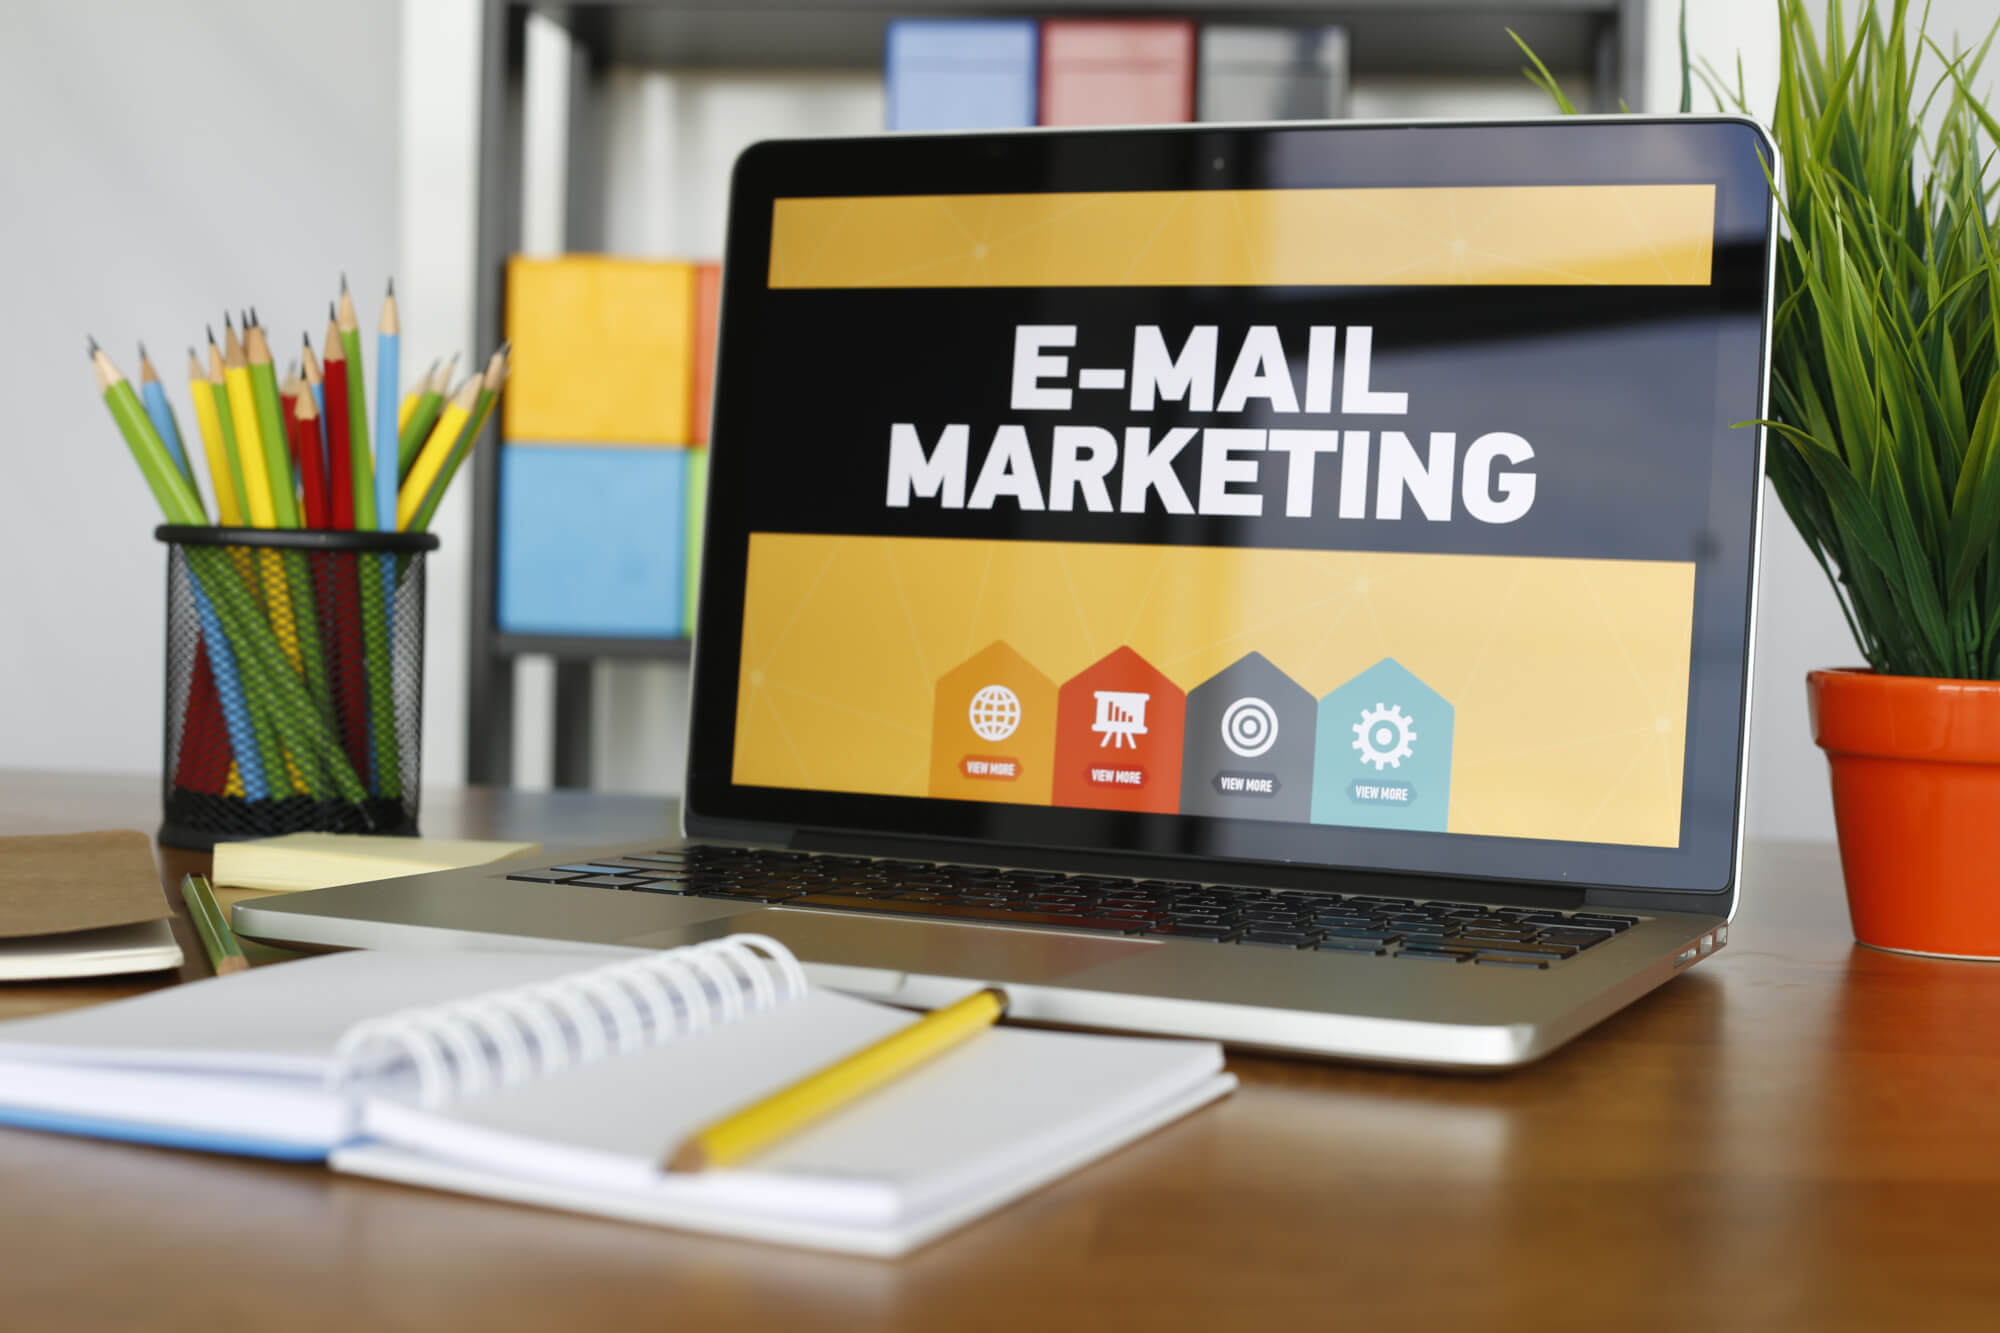 Your Search Is Over, Great Email Marketing Tips Ahead!